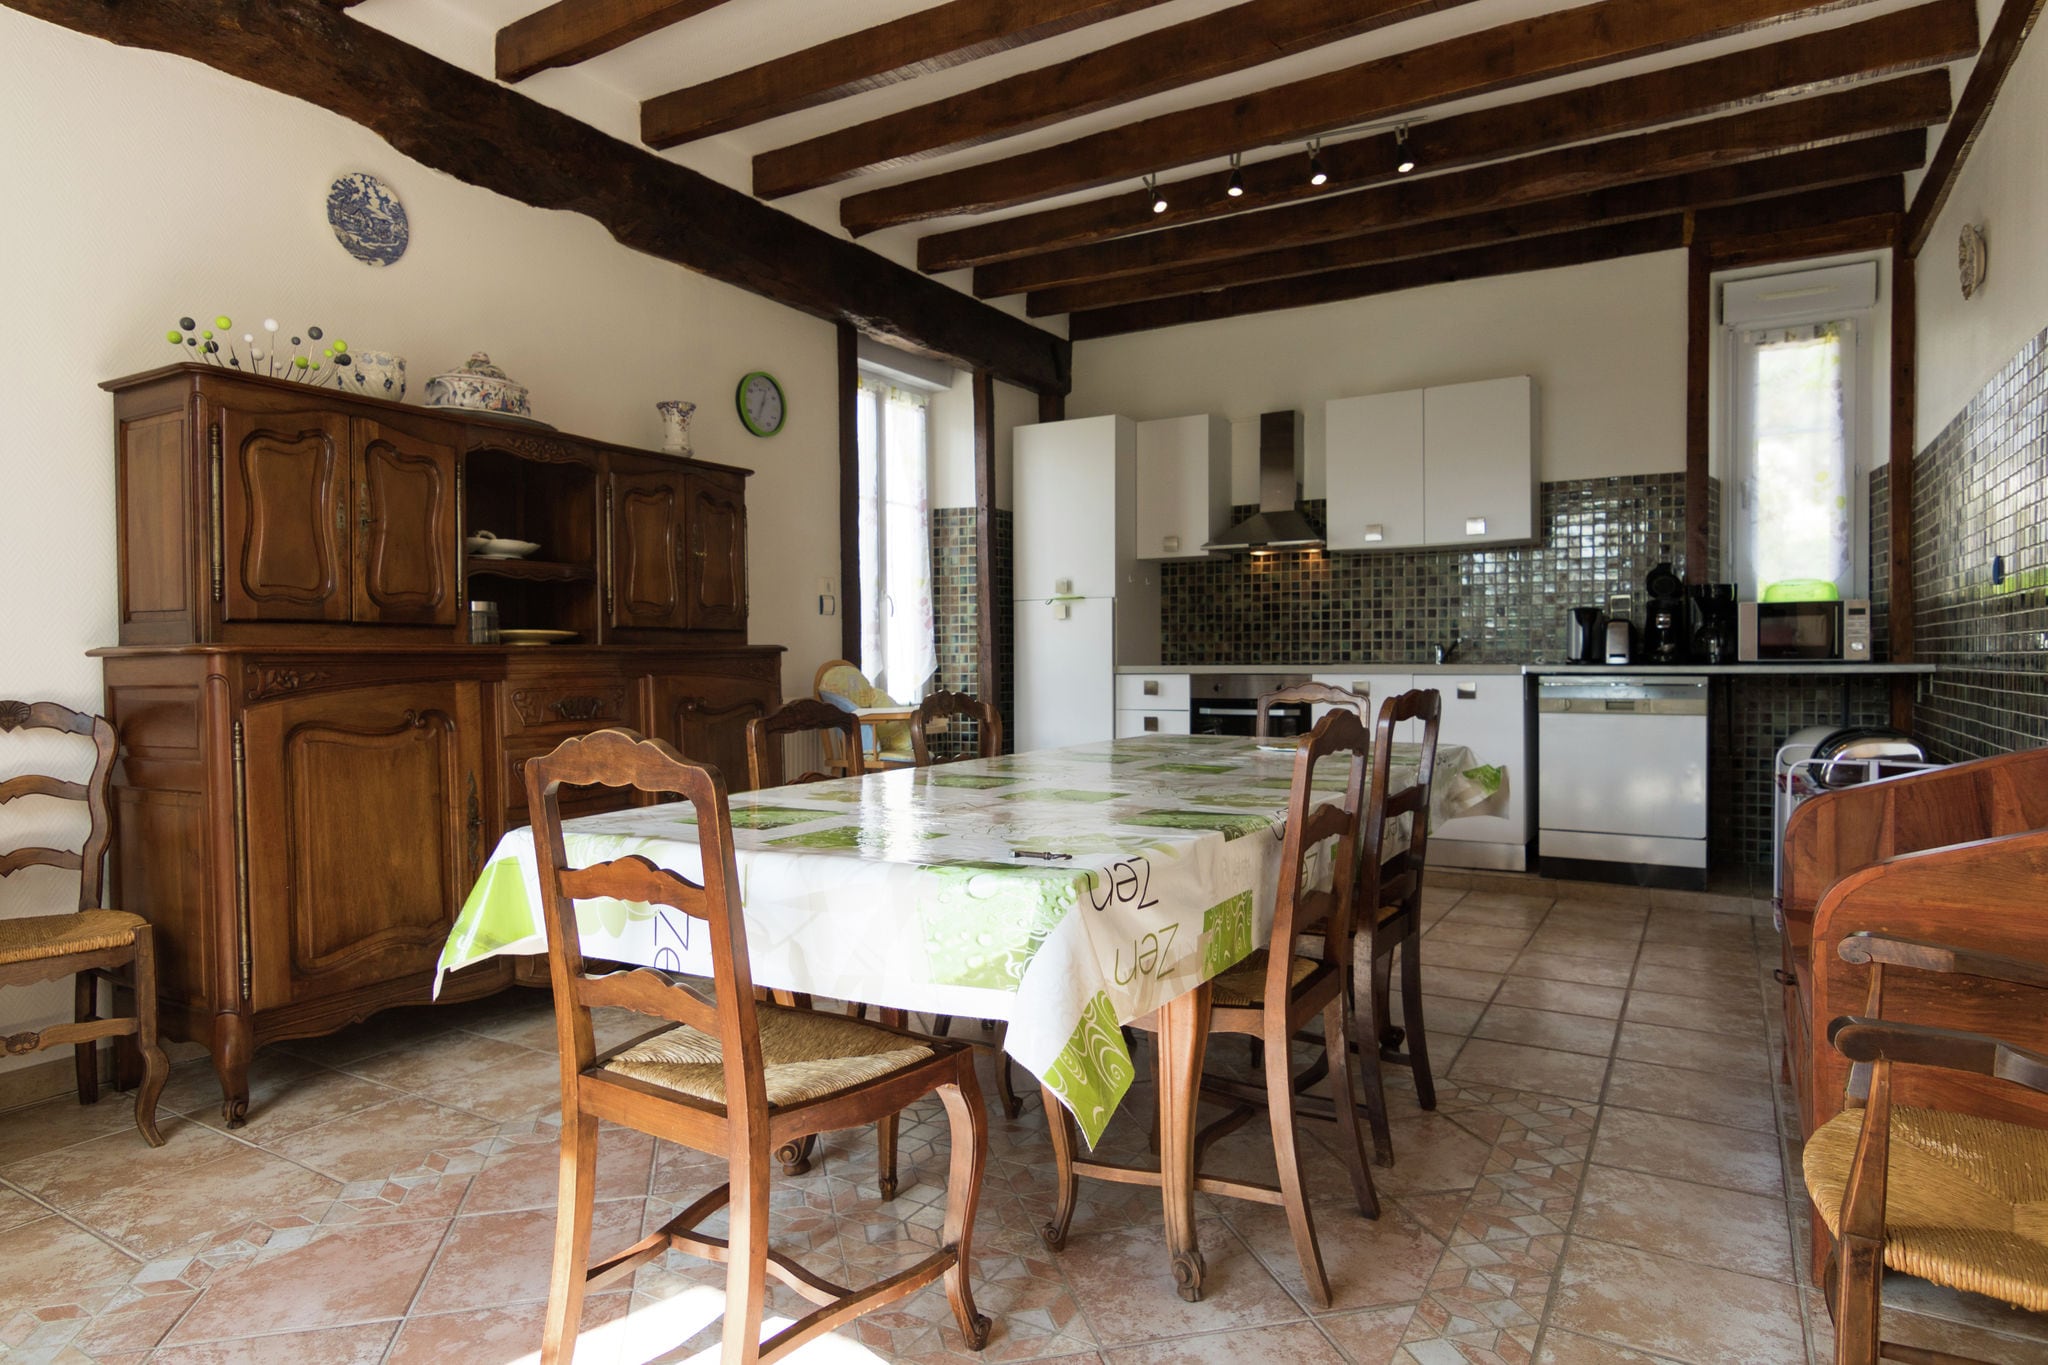 Magnificent holiday home with large garden close to Lac de Séchemailles.